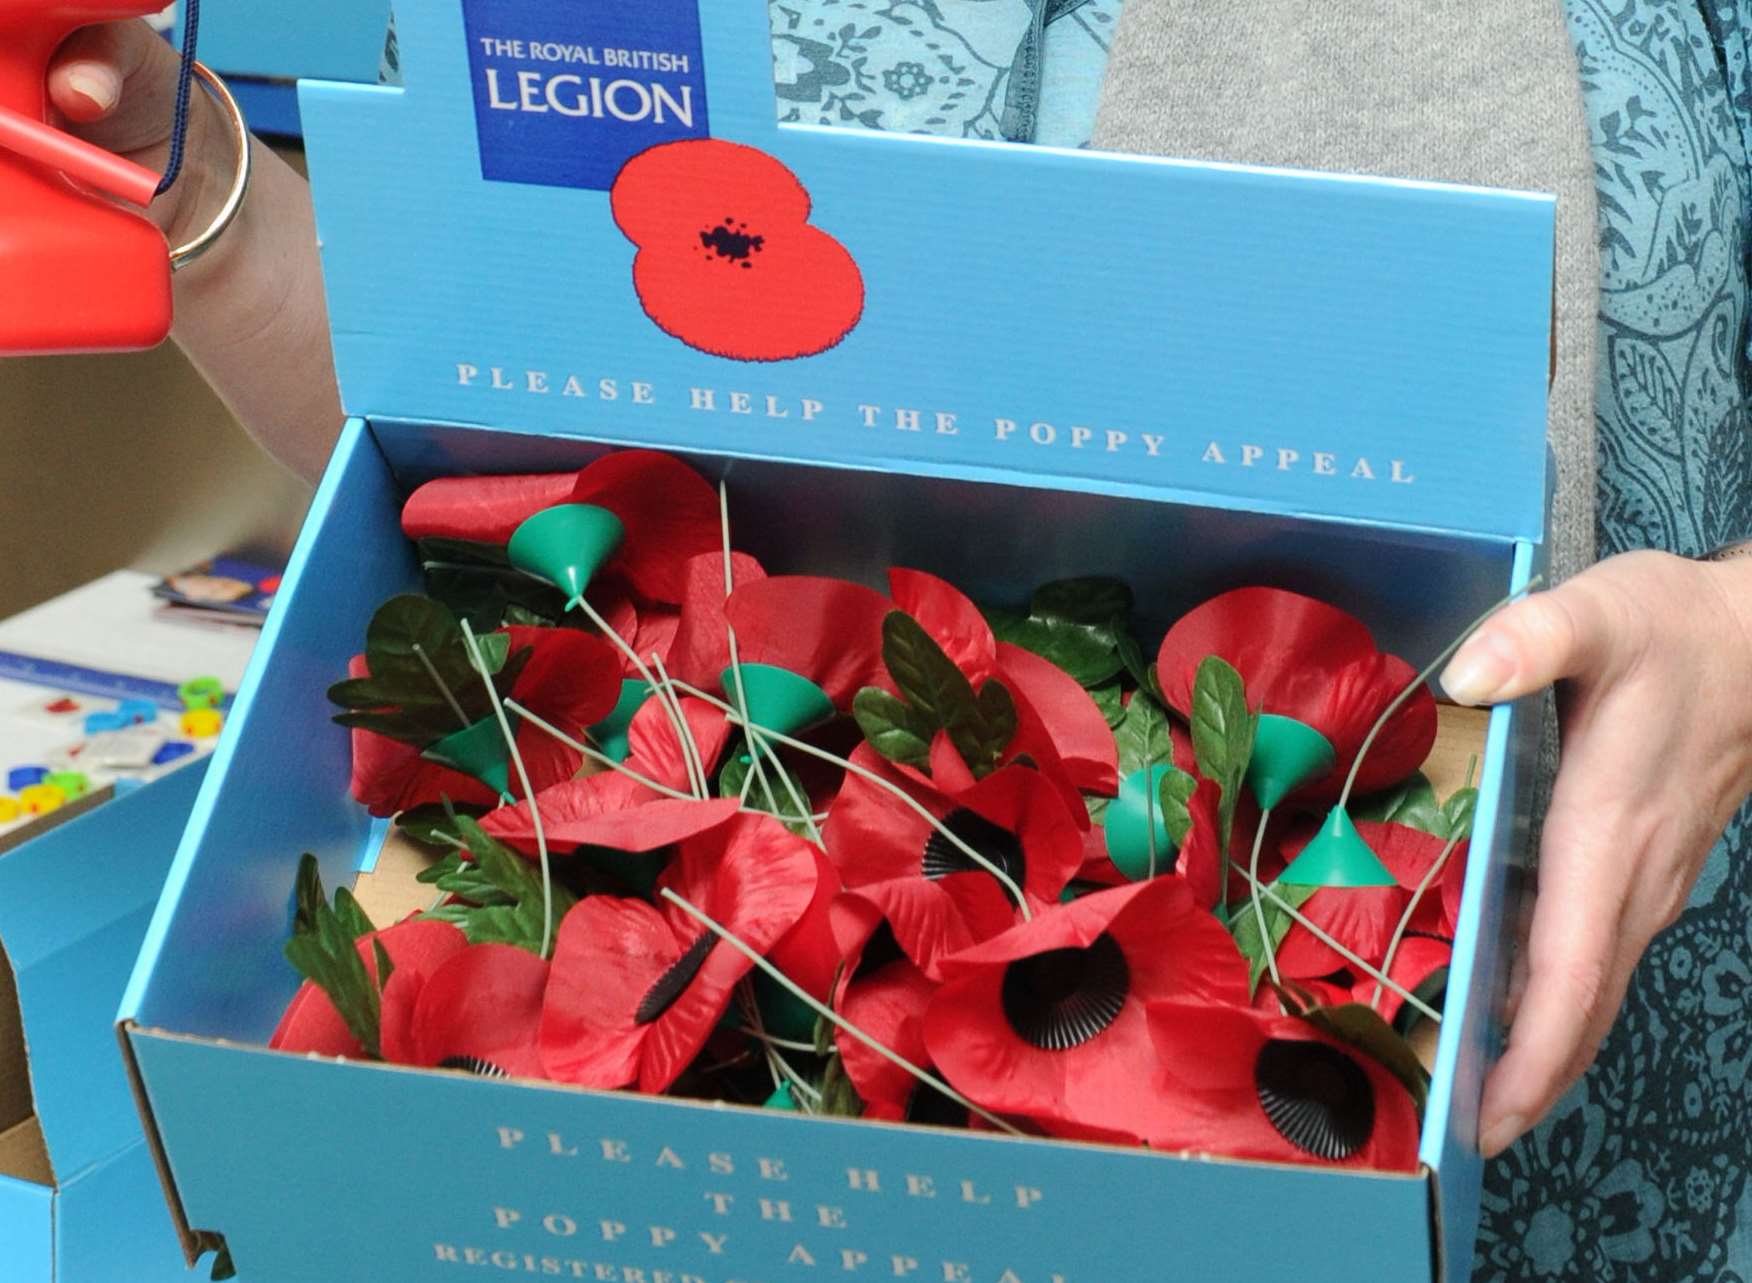 A poppy collection box